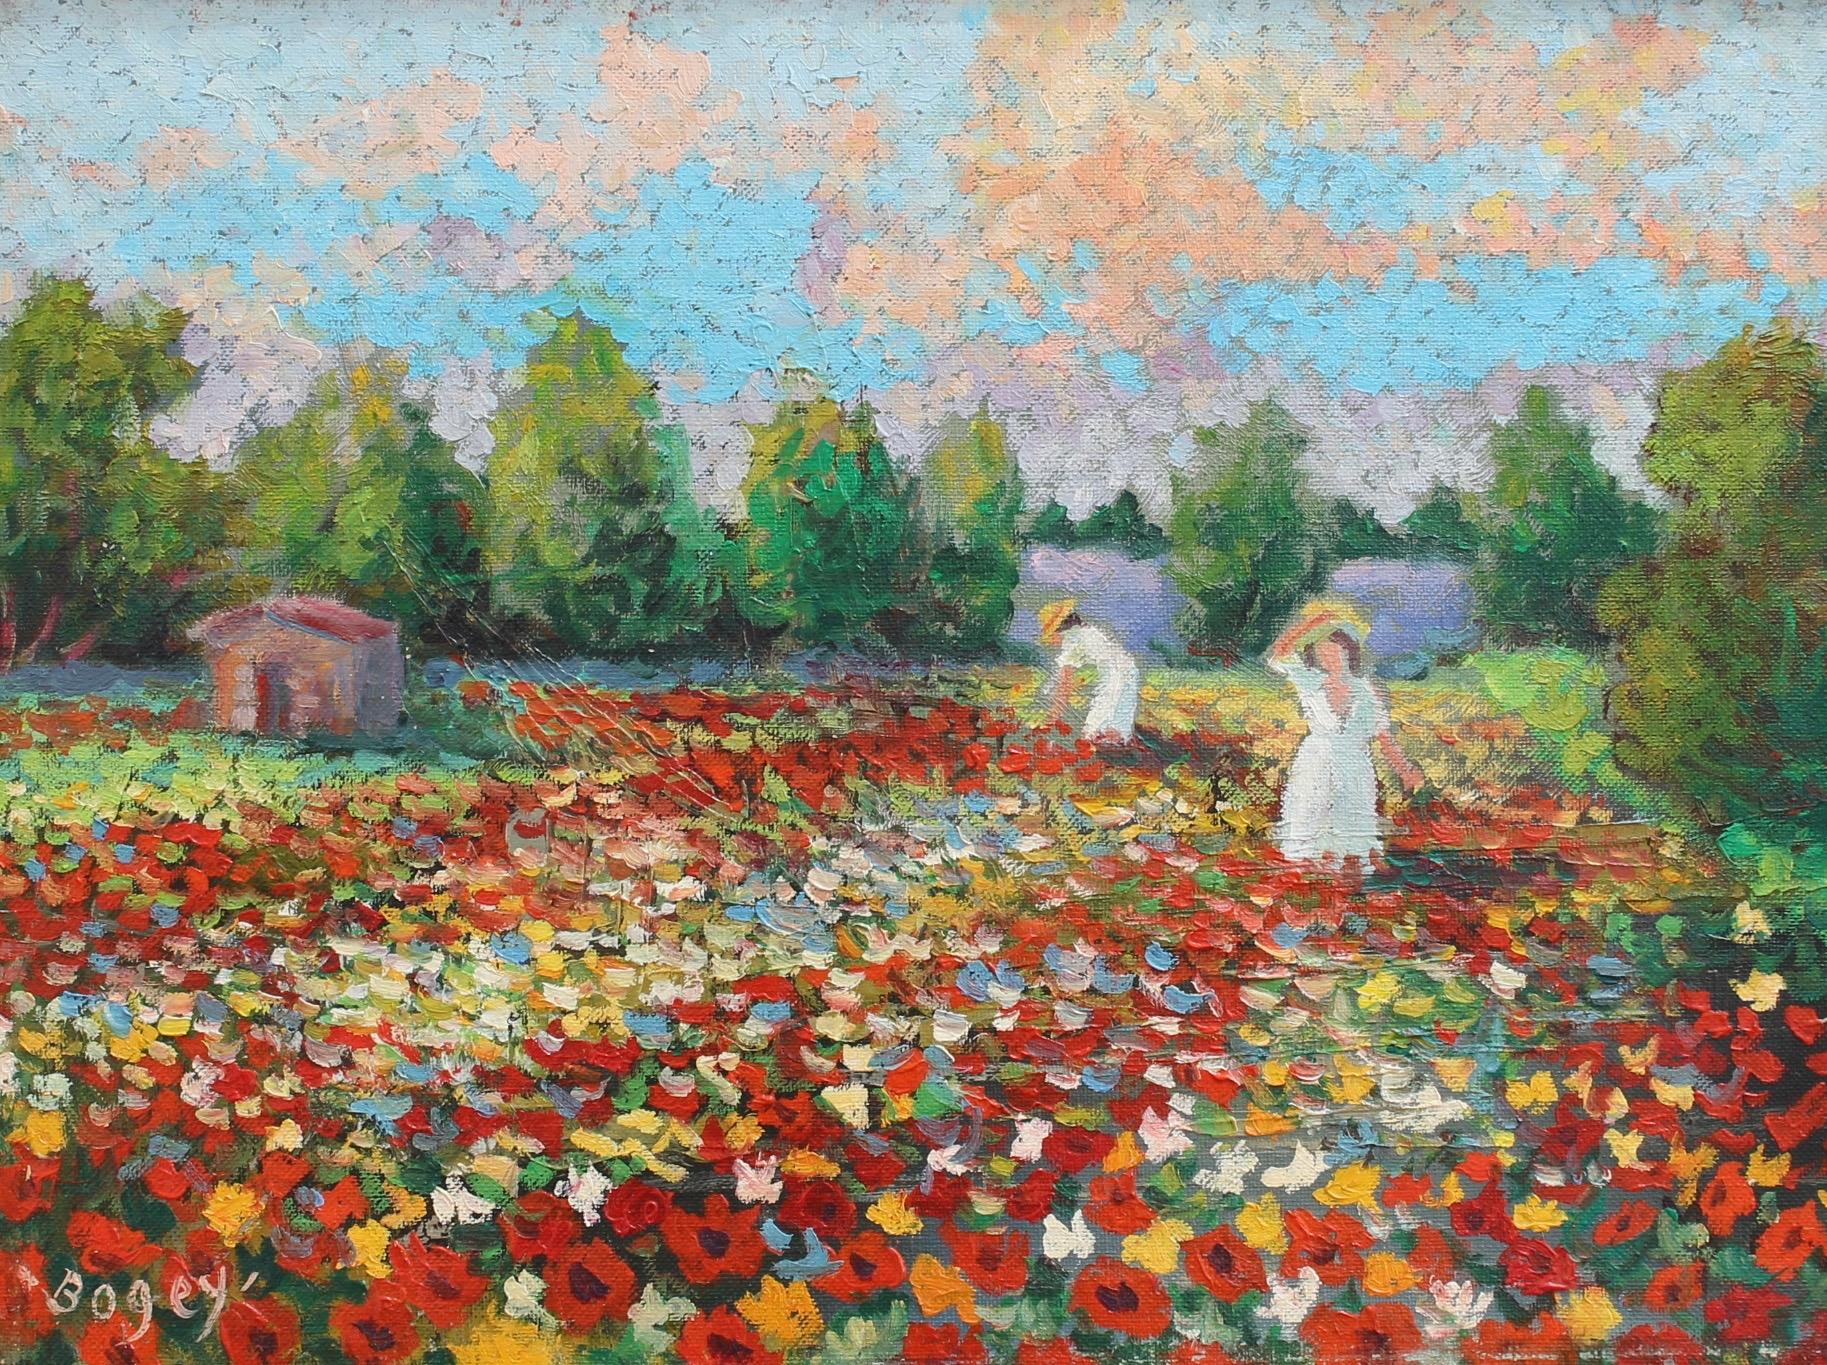 'Women Tending Flowered Field' (Femmes au Champ Fleuri), oil on board (circa 1960s), impressionist work by French Artist Antoine Bogey (1943 -     ). A beautiful Provençal day sees two hatted women in summer dresses tending a beautiful field of